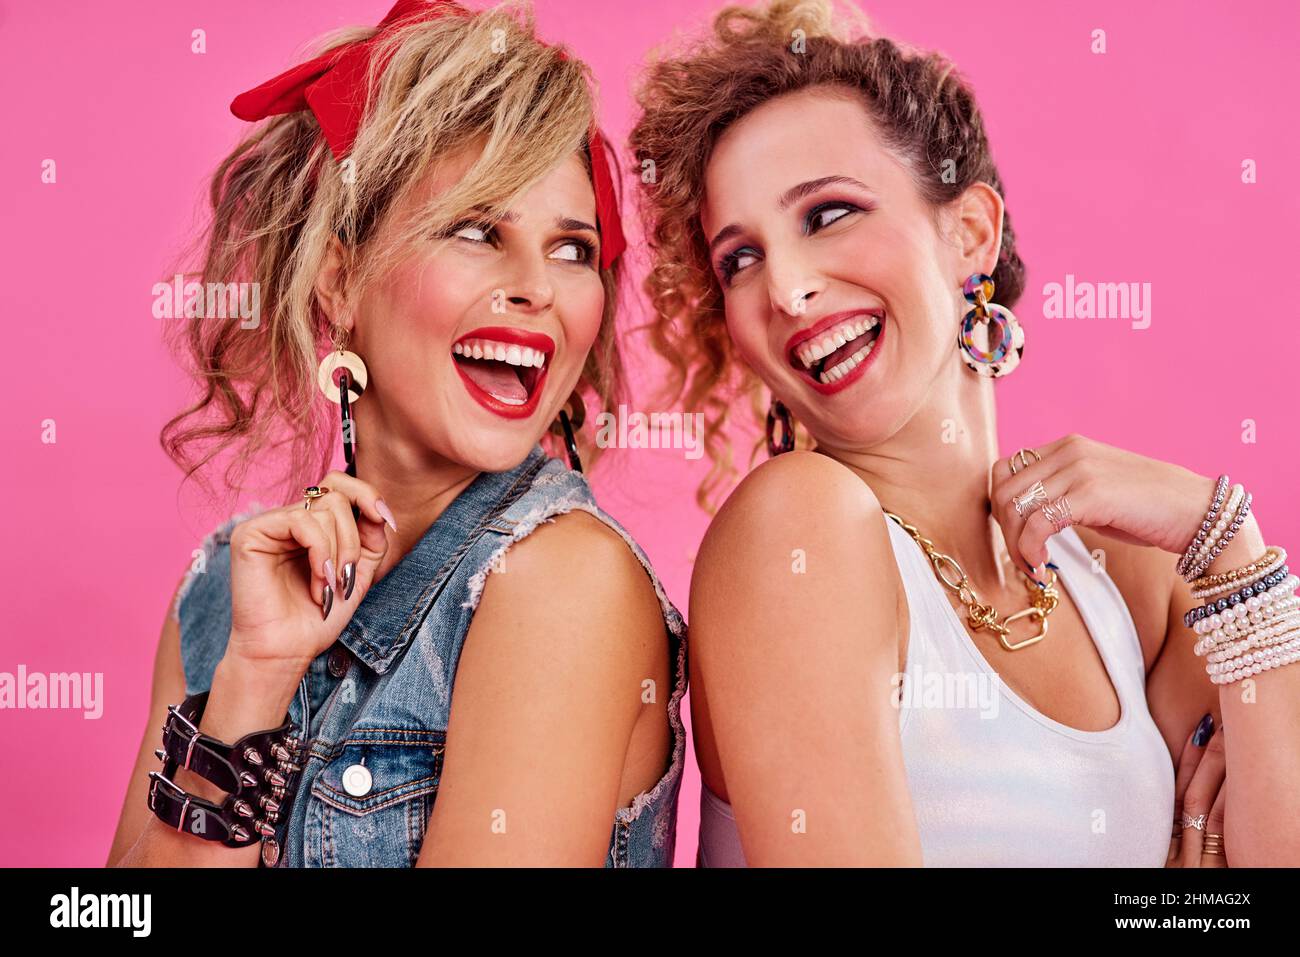 We share a love for 80s fashion. Studio shot of two beautiful young women  styled in 80s clothing Stock Photo - Alamy